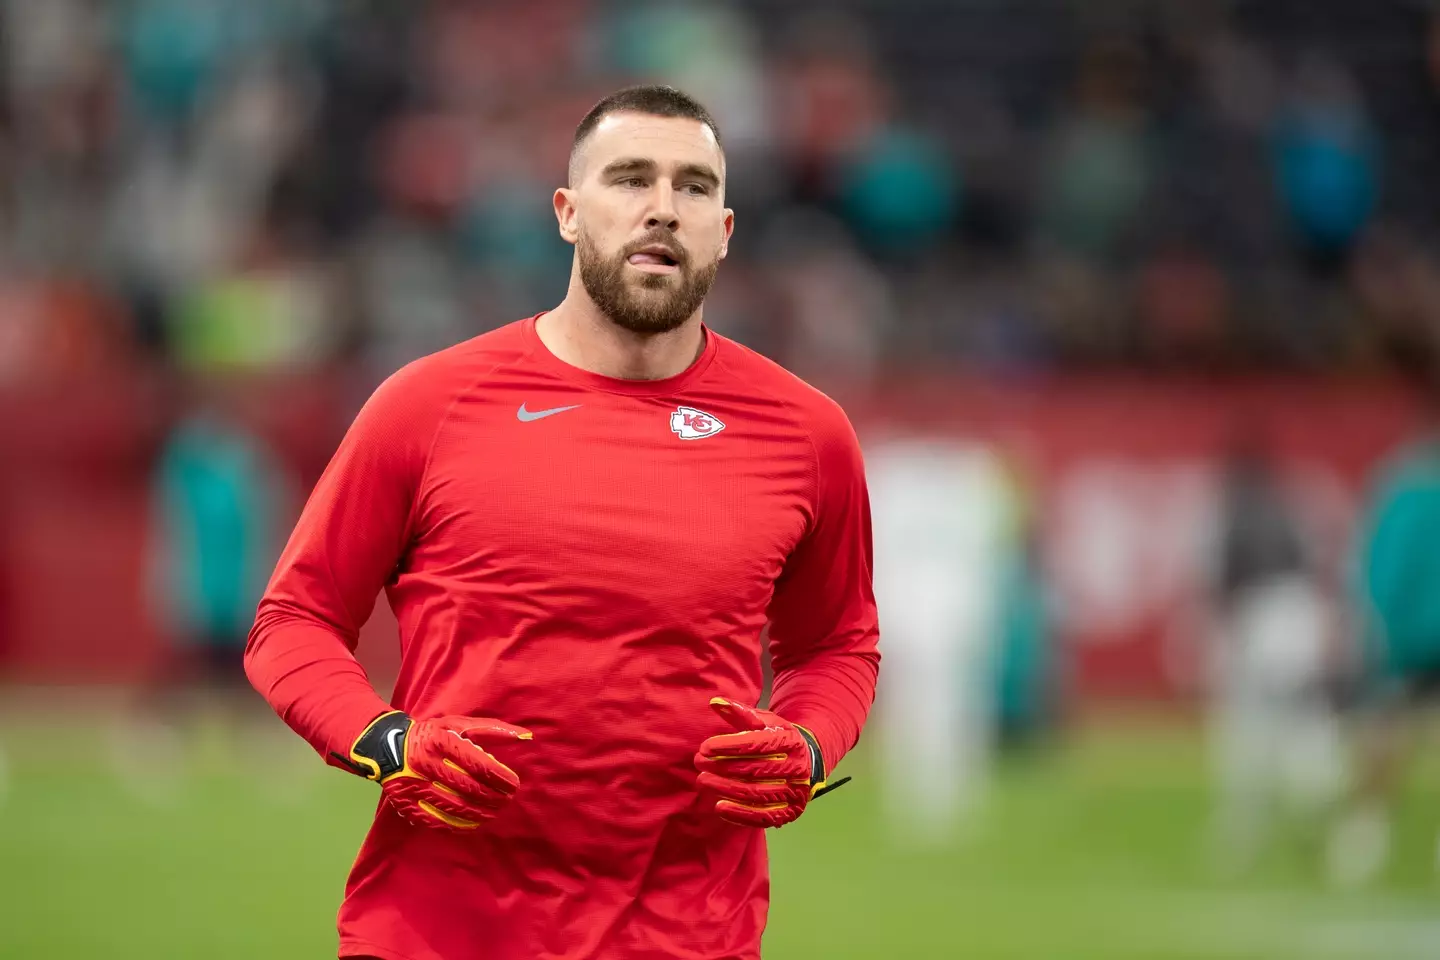 Travis Kelce has spoken out about Swift changing up the lyrics to 'Karma' for him.